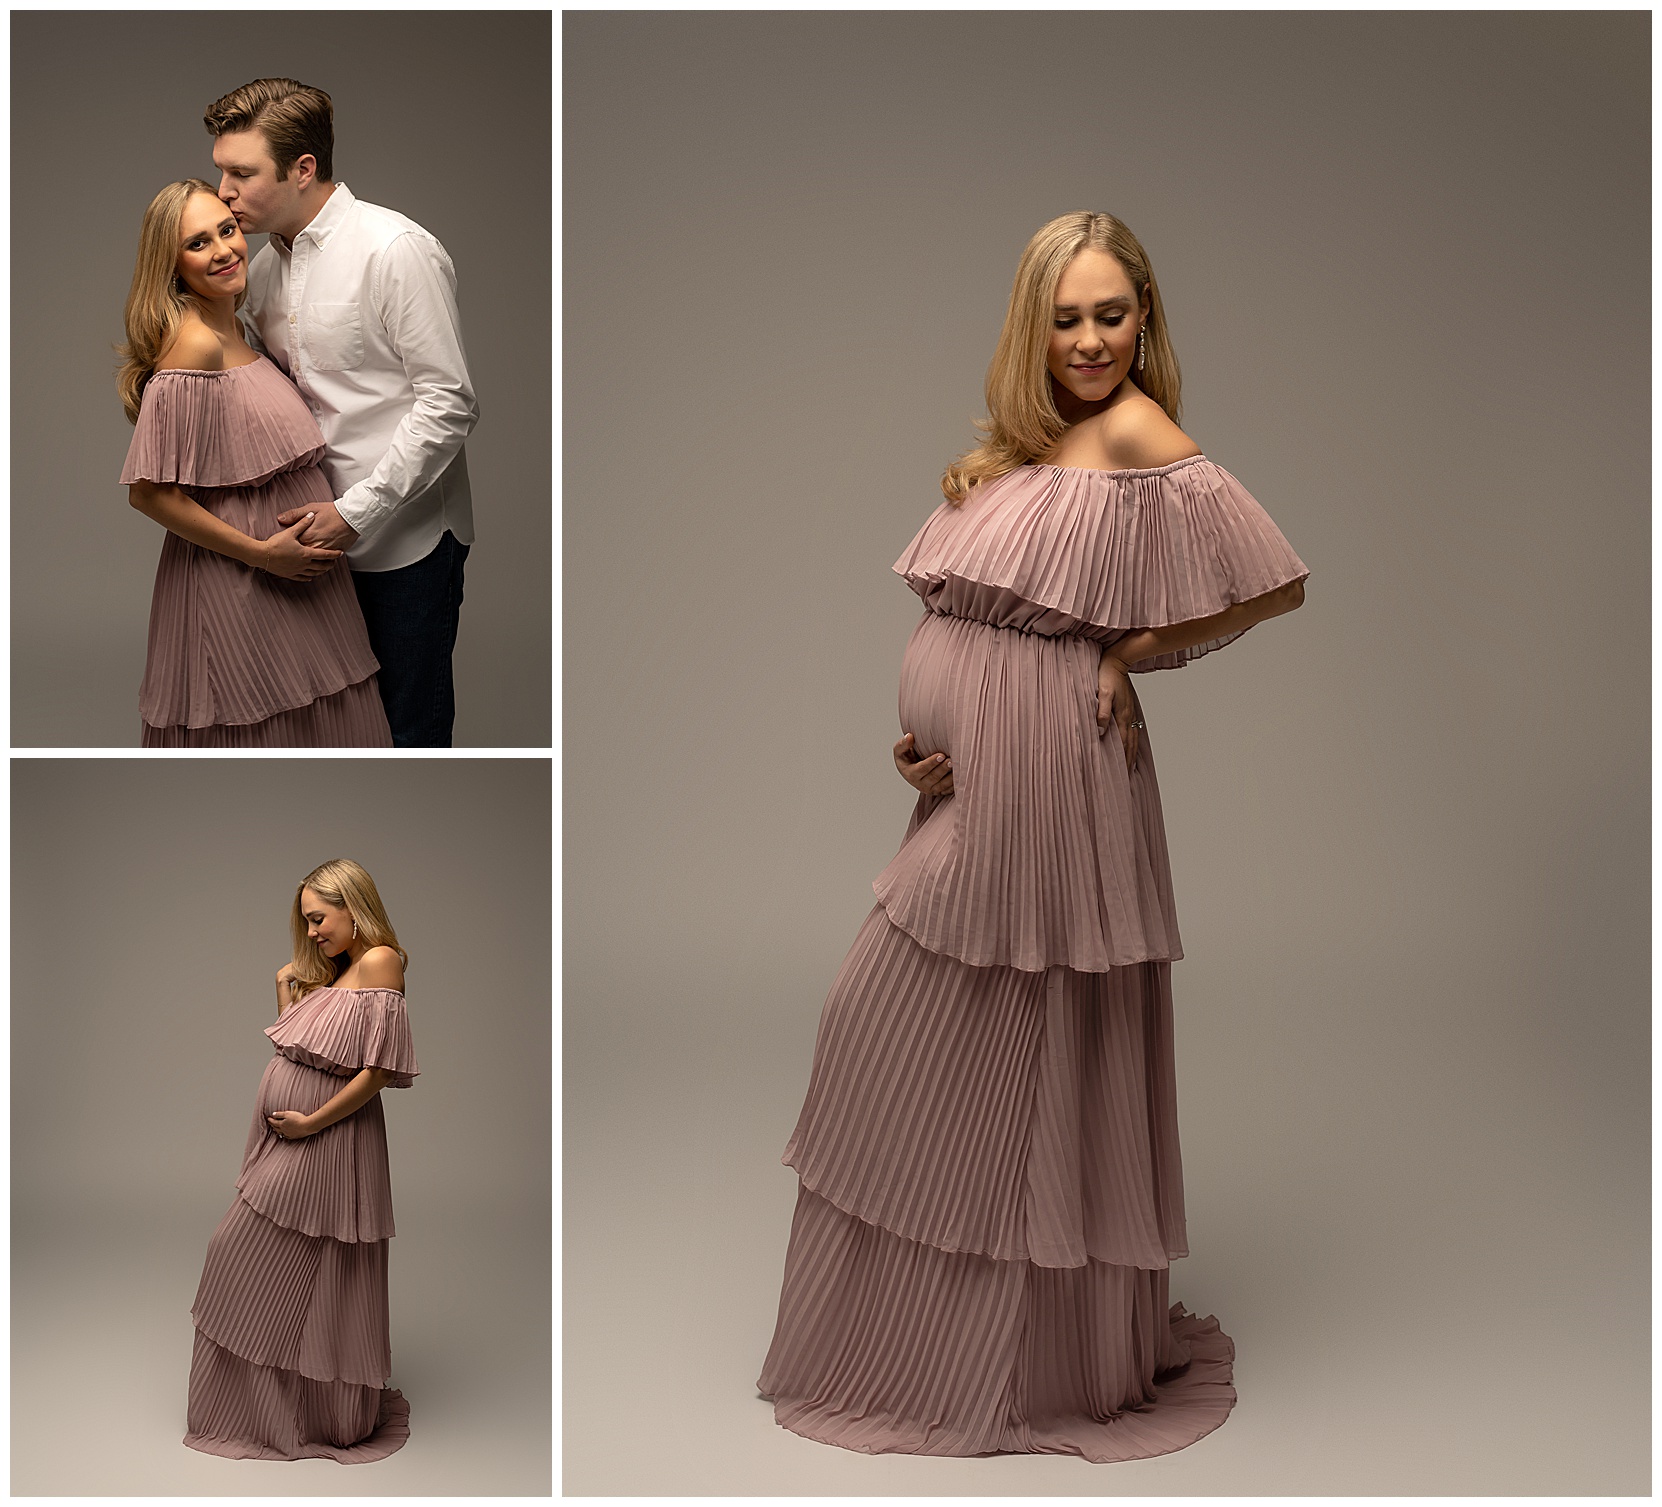 Cedar Park Maternity Session featuring pregnant woman in a pink crinkle dress with a ruffle top